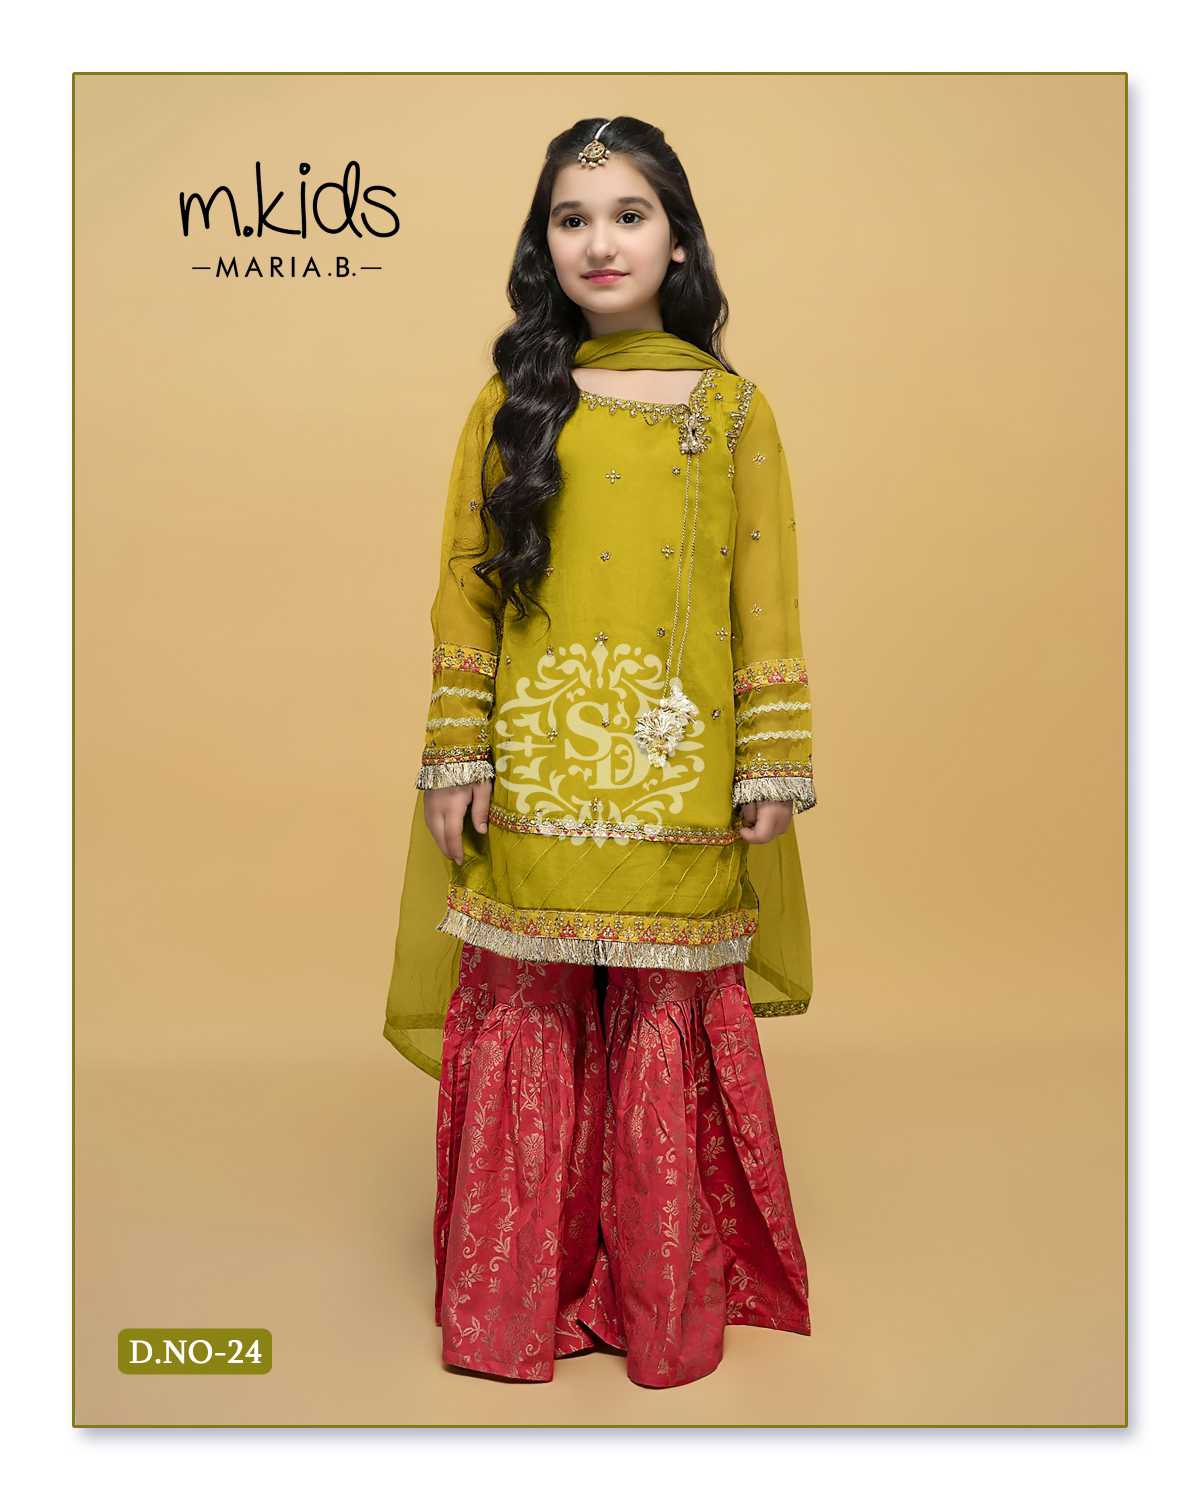 SAI DRESSES PRESENT D.NO 24 READY TO WEDDING WEAR GHARARA STYLE DESIGNER PAKISTANI KIDS COMBO SUITS IN WHOLESALE RATE IN SURAT